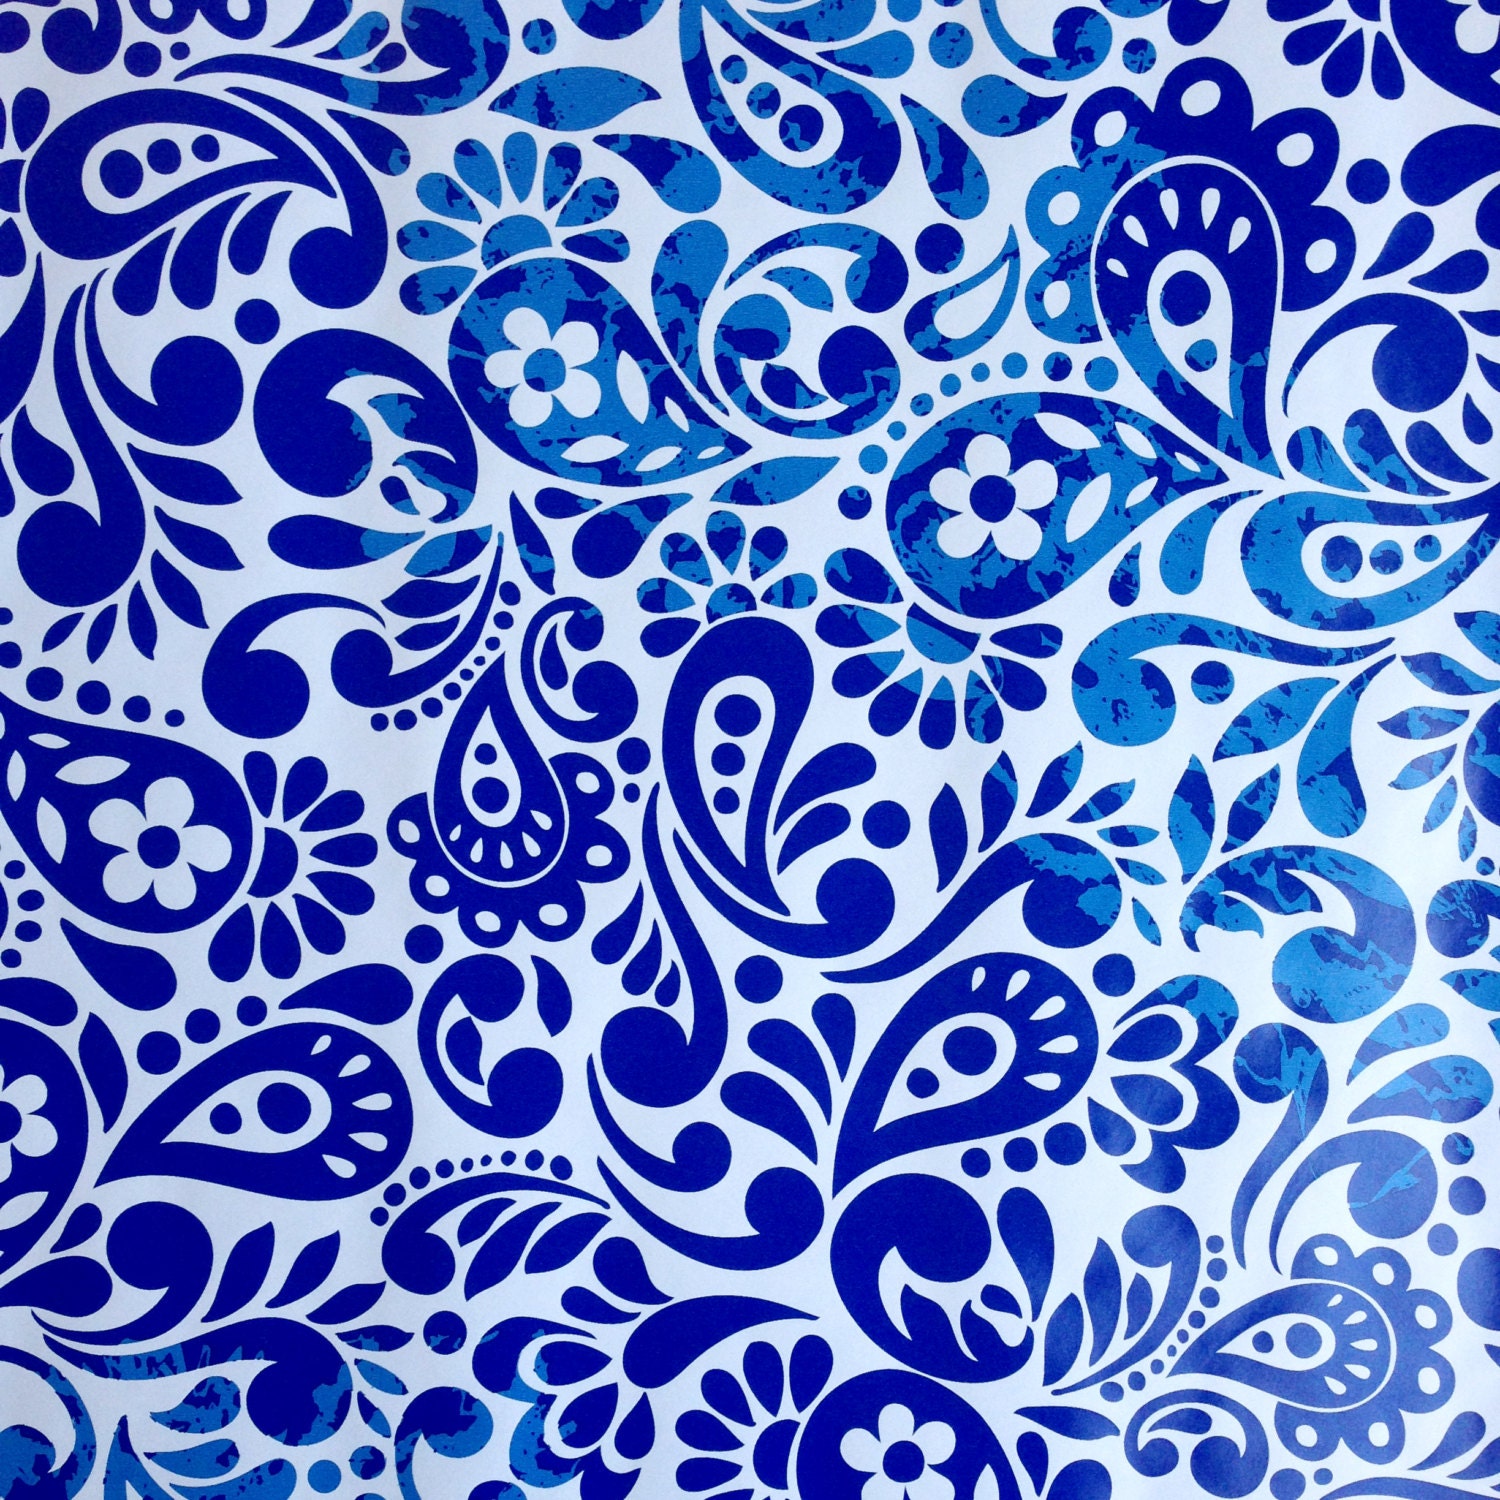 Blue Paisley Wrapping Paper 1 Roll all-occasion by DandelionPaper